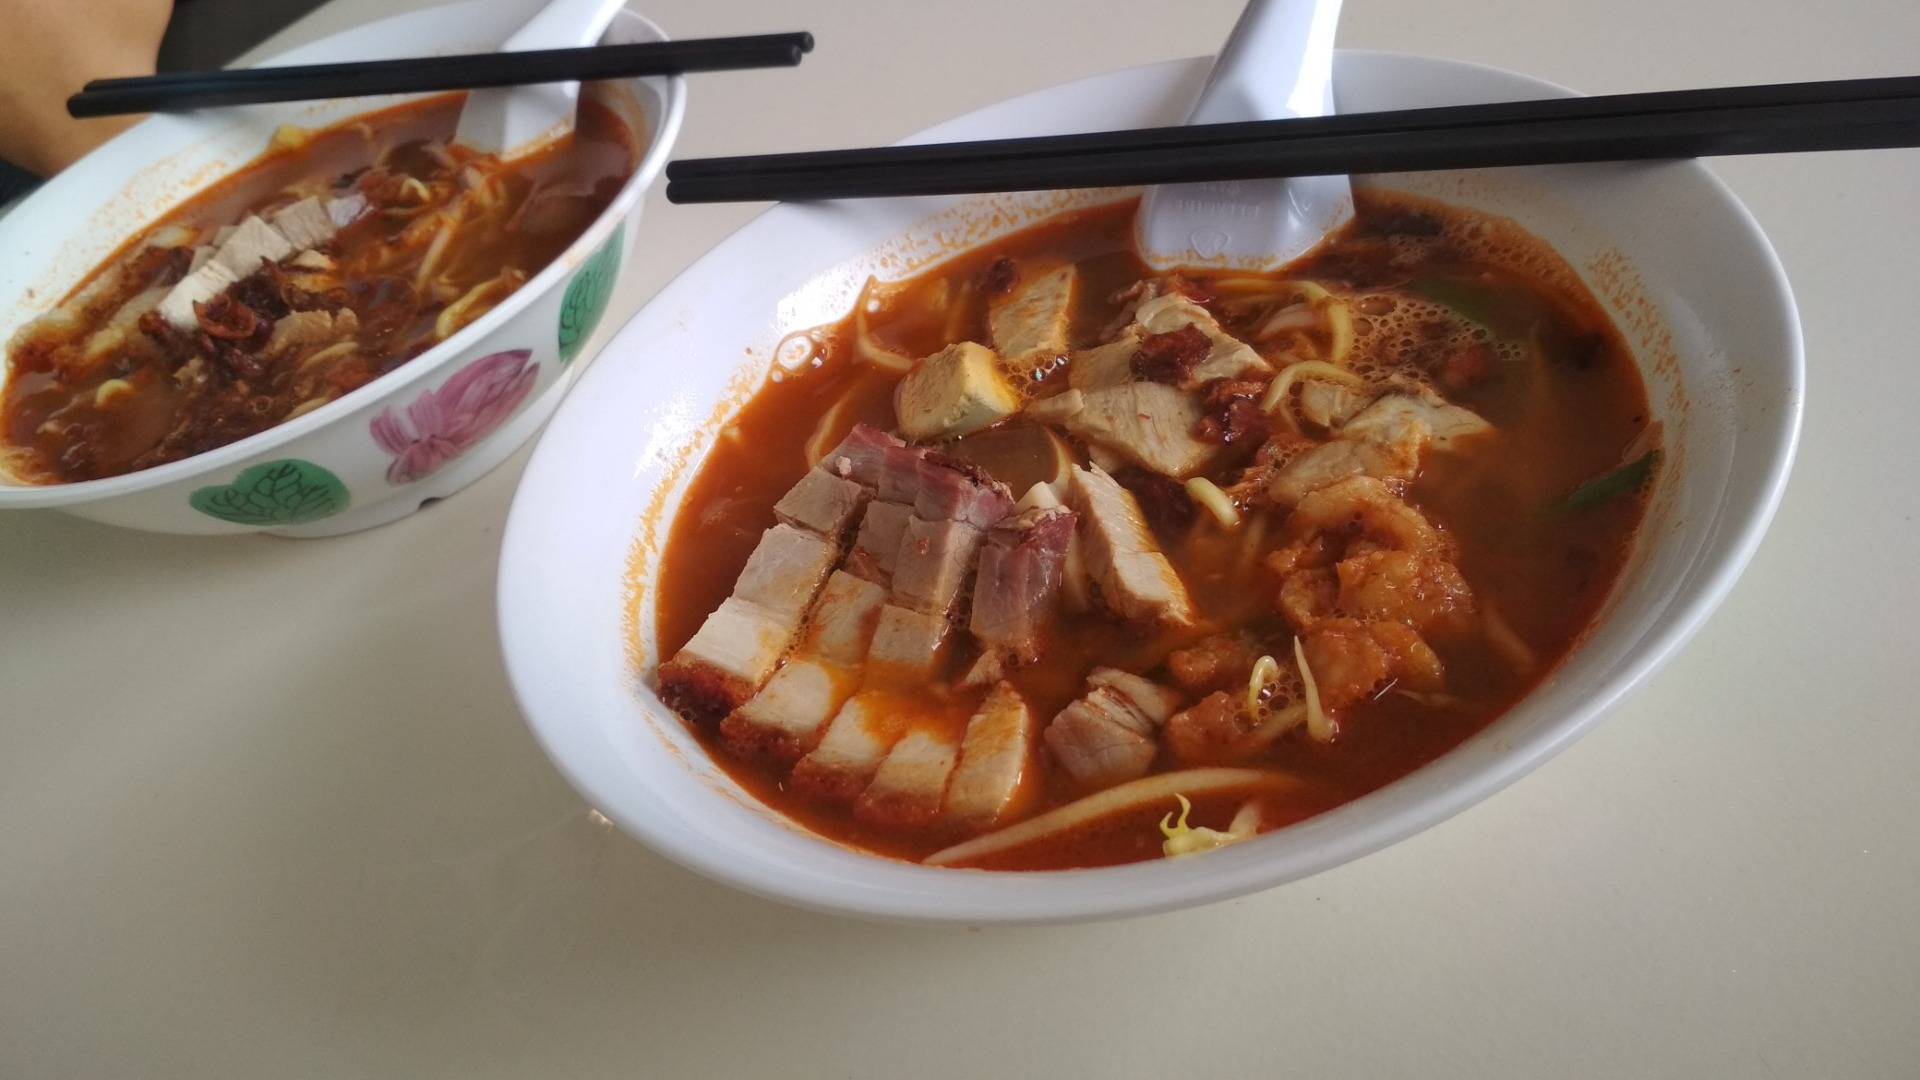 Prawn Noodle is one of the significant delicacies in Penang